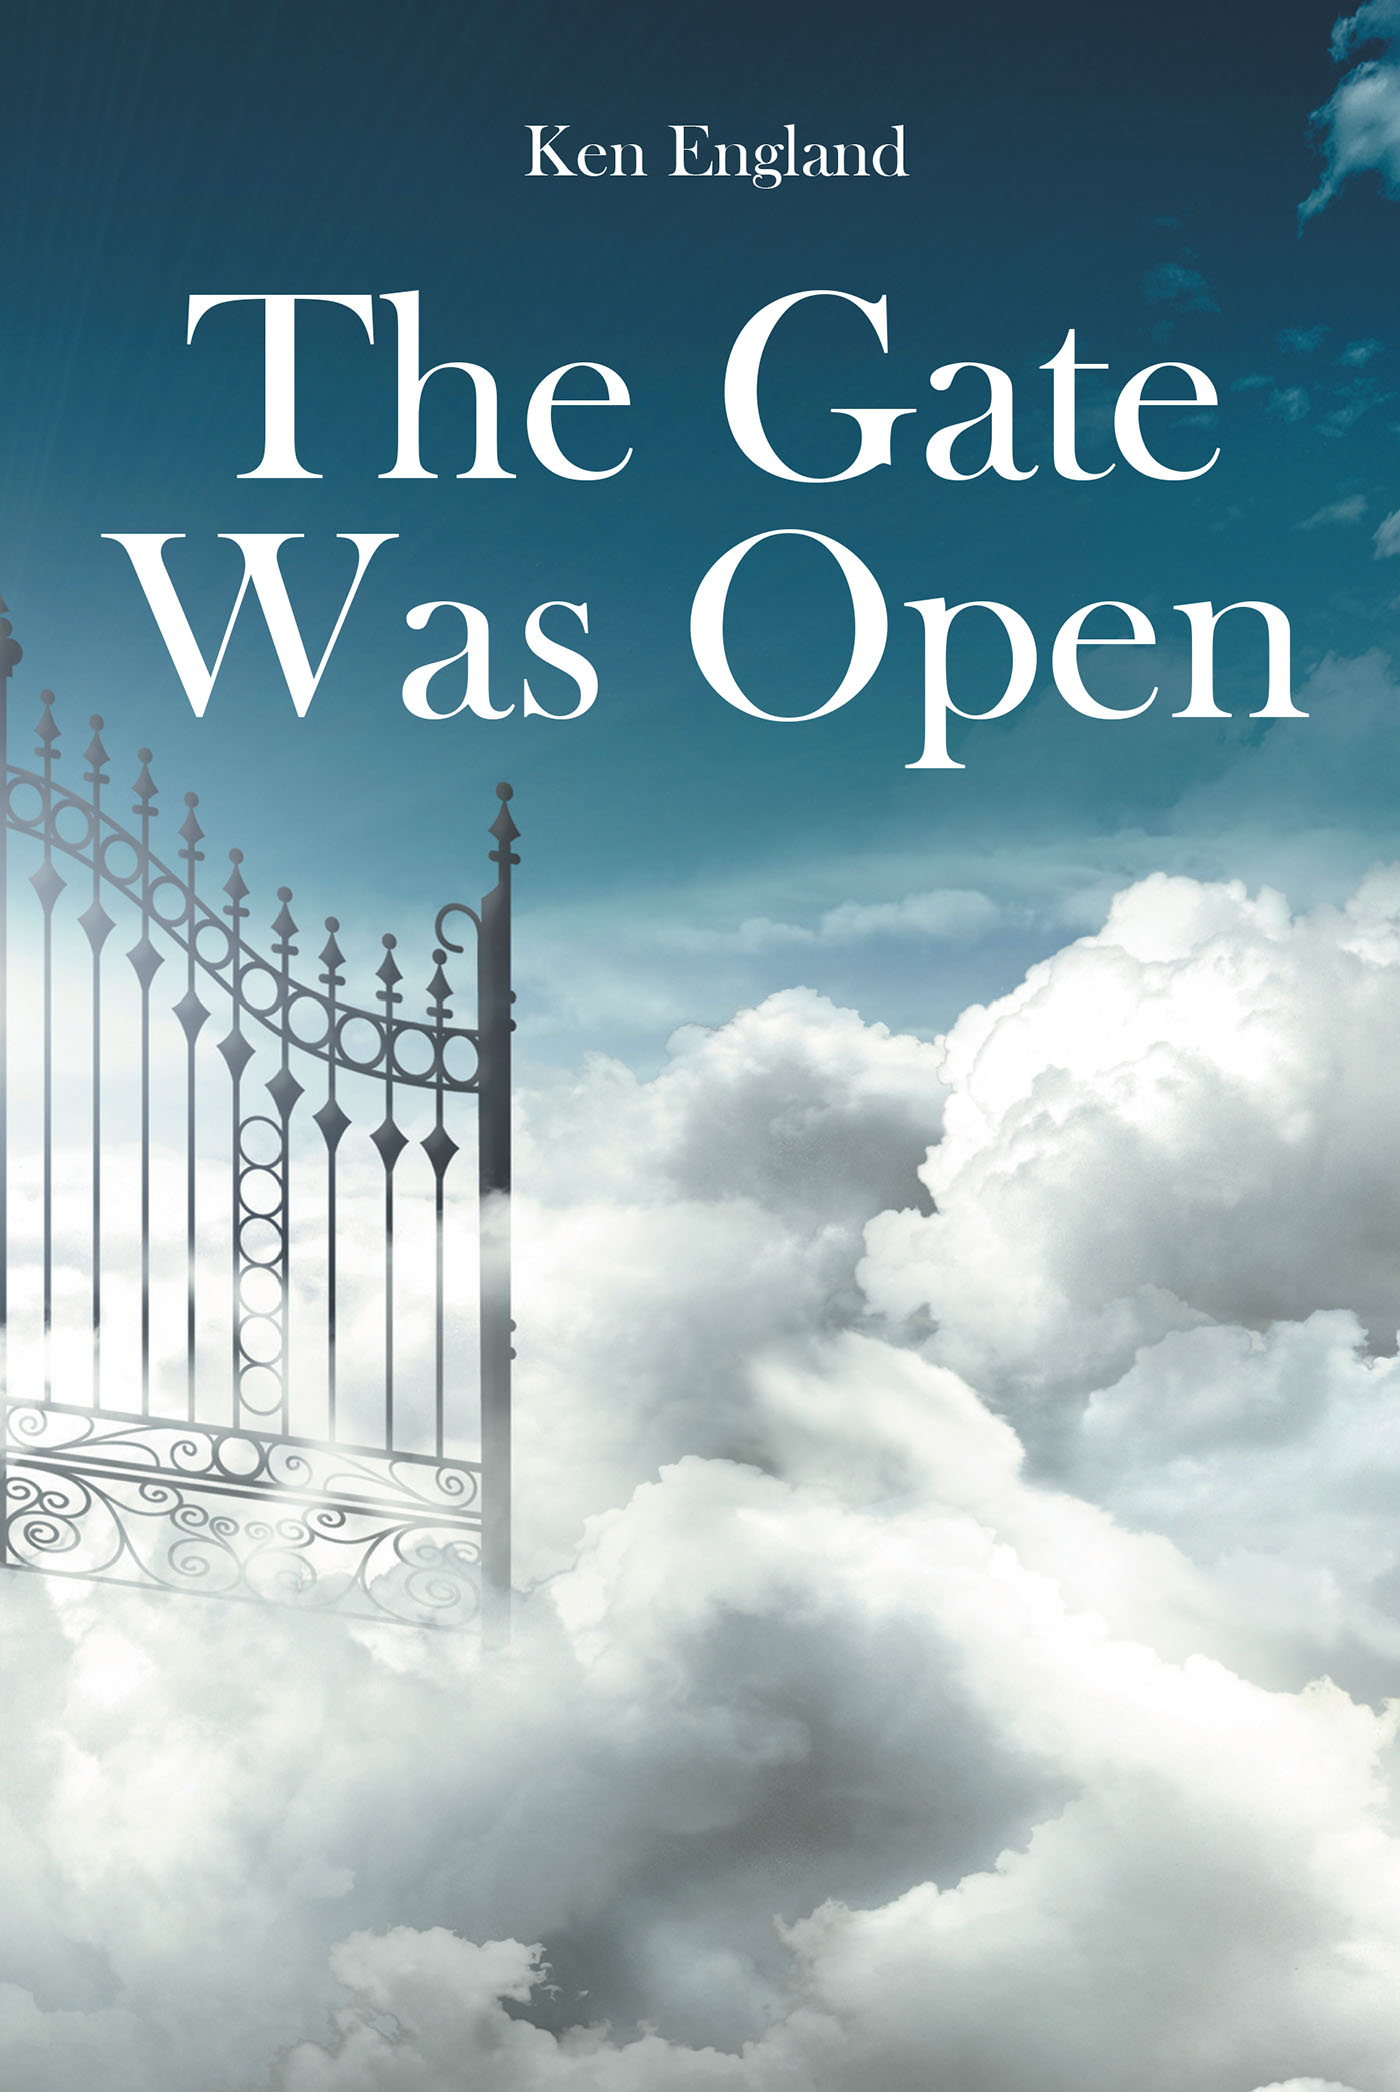 Author Ken England’s New Book, "The Gate Was Open," is an Unexpected Tale of a Washed-Up Rockstar Who is Reunited with the Daughter He Never Knew He Had